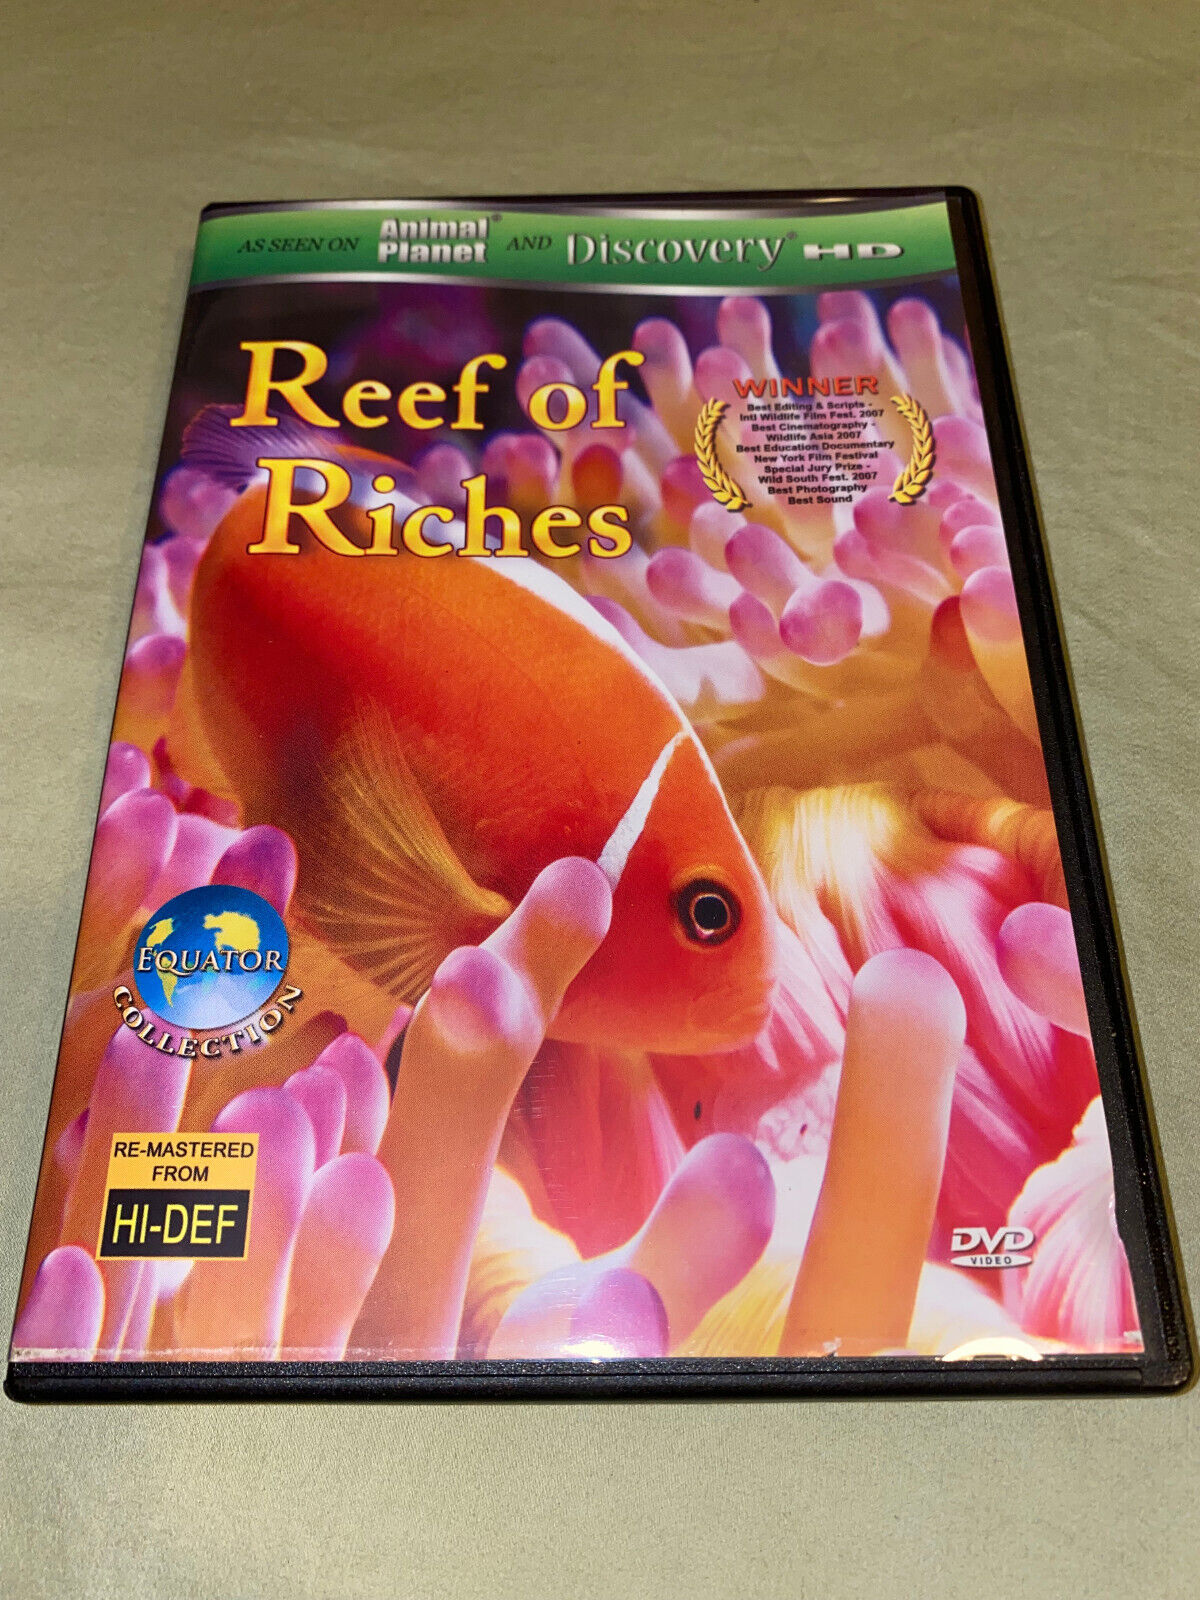 Equator: Reef of Riches DVD Animal Planet Discovery Documentary Movie  690445057624 | eBay